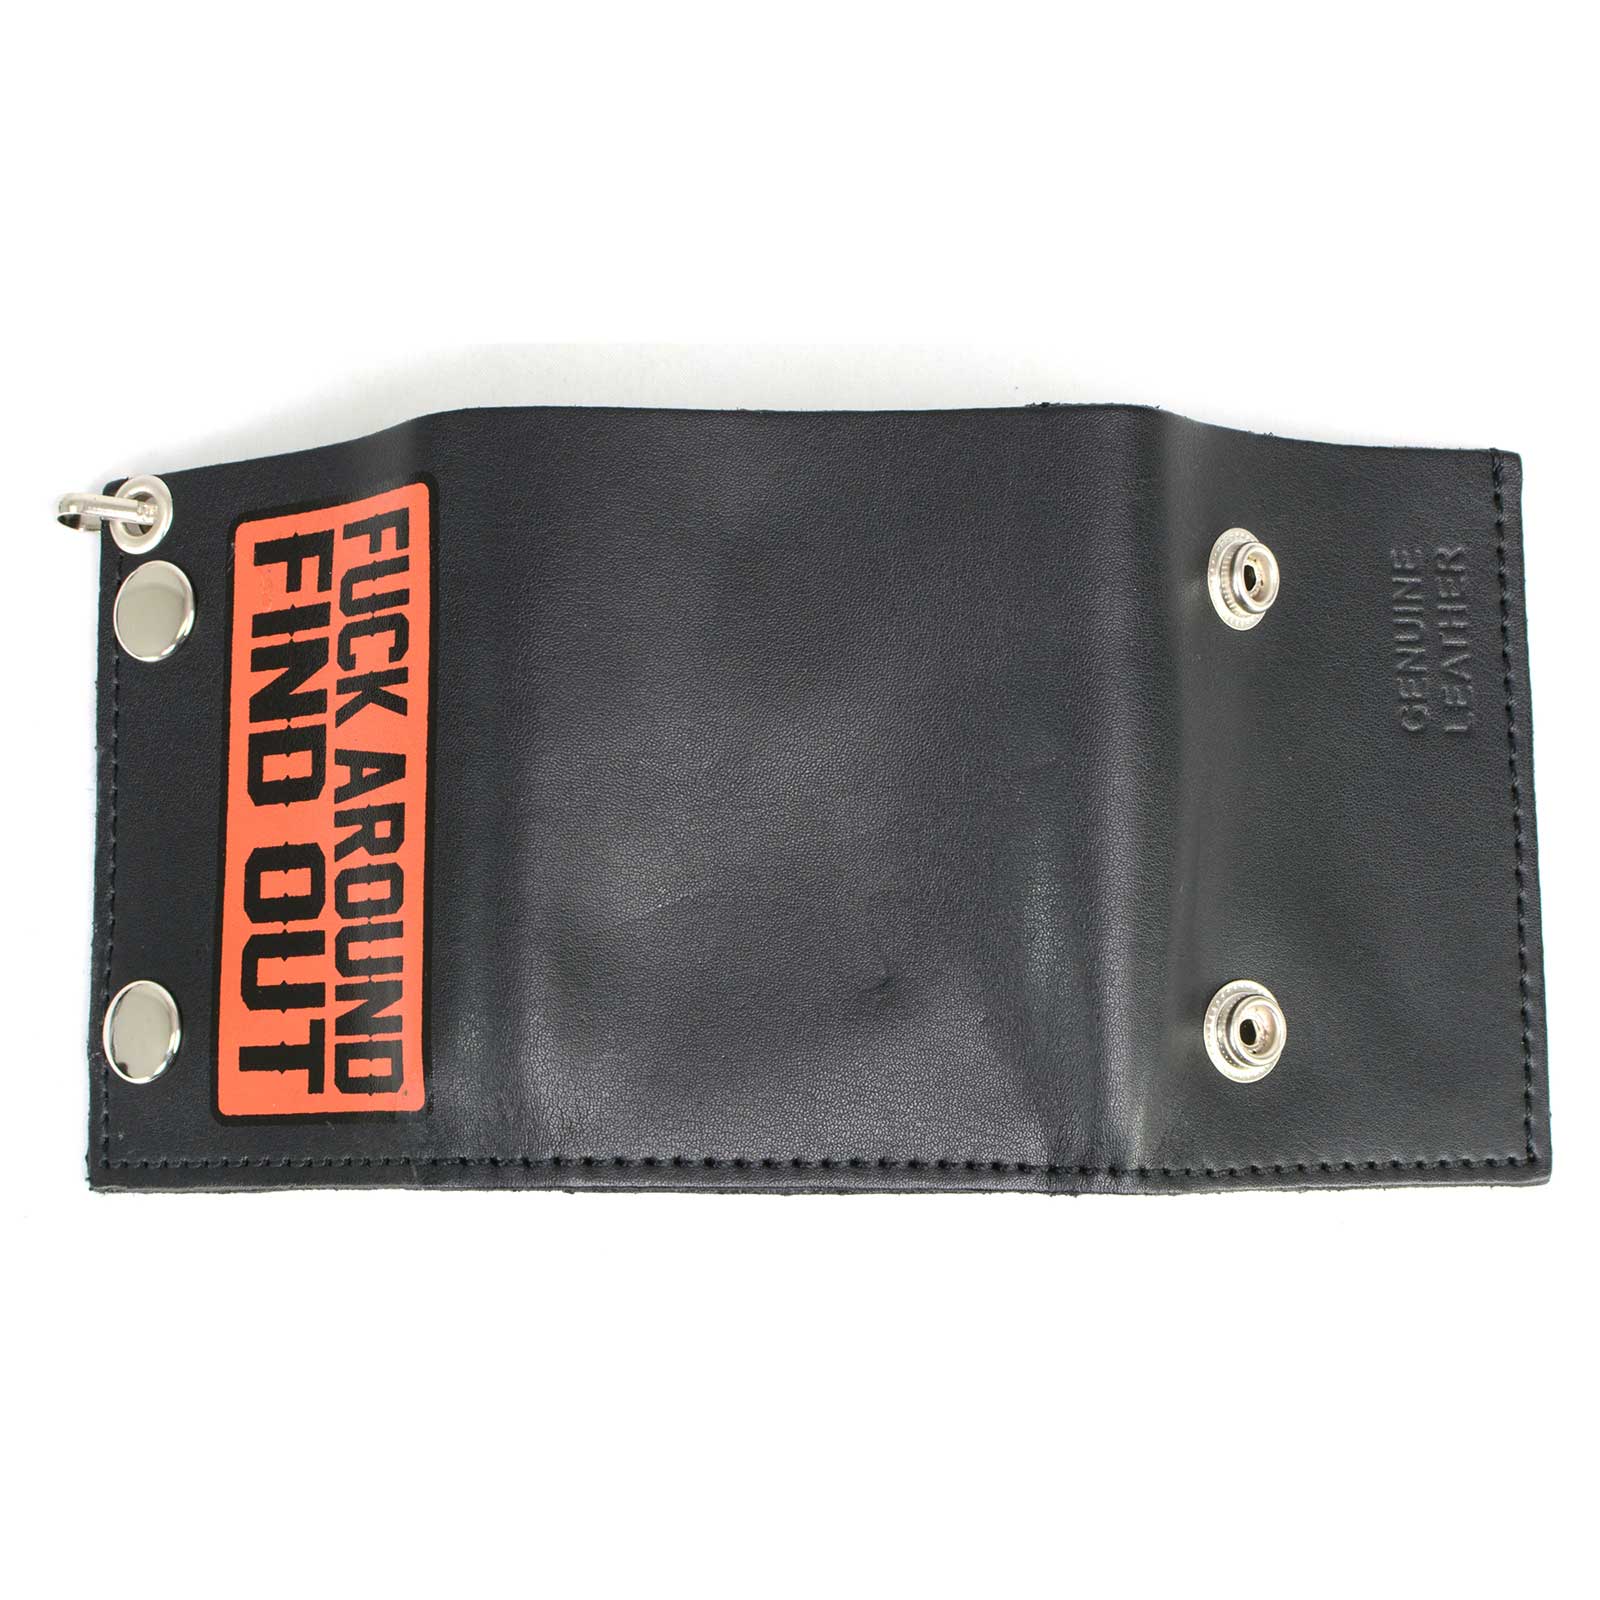 Milwaukee Leather MLW7841 Men's 4” Black Leather Biker Wallet - Tri-Fold Anti-Theft Stainless Steel Chain w/ "F.A.F.O"